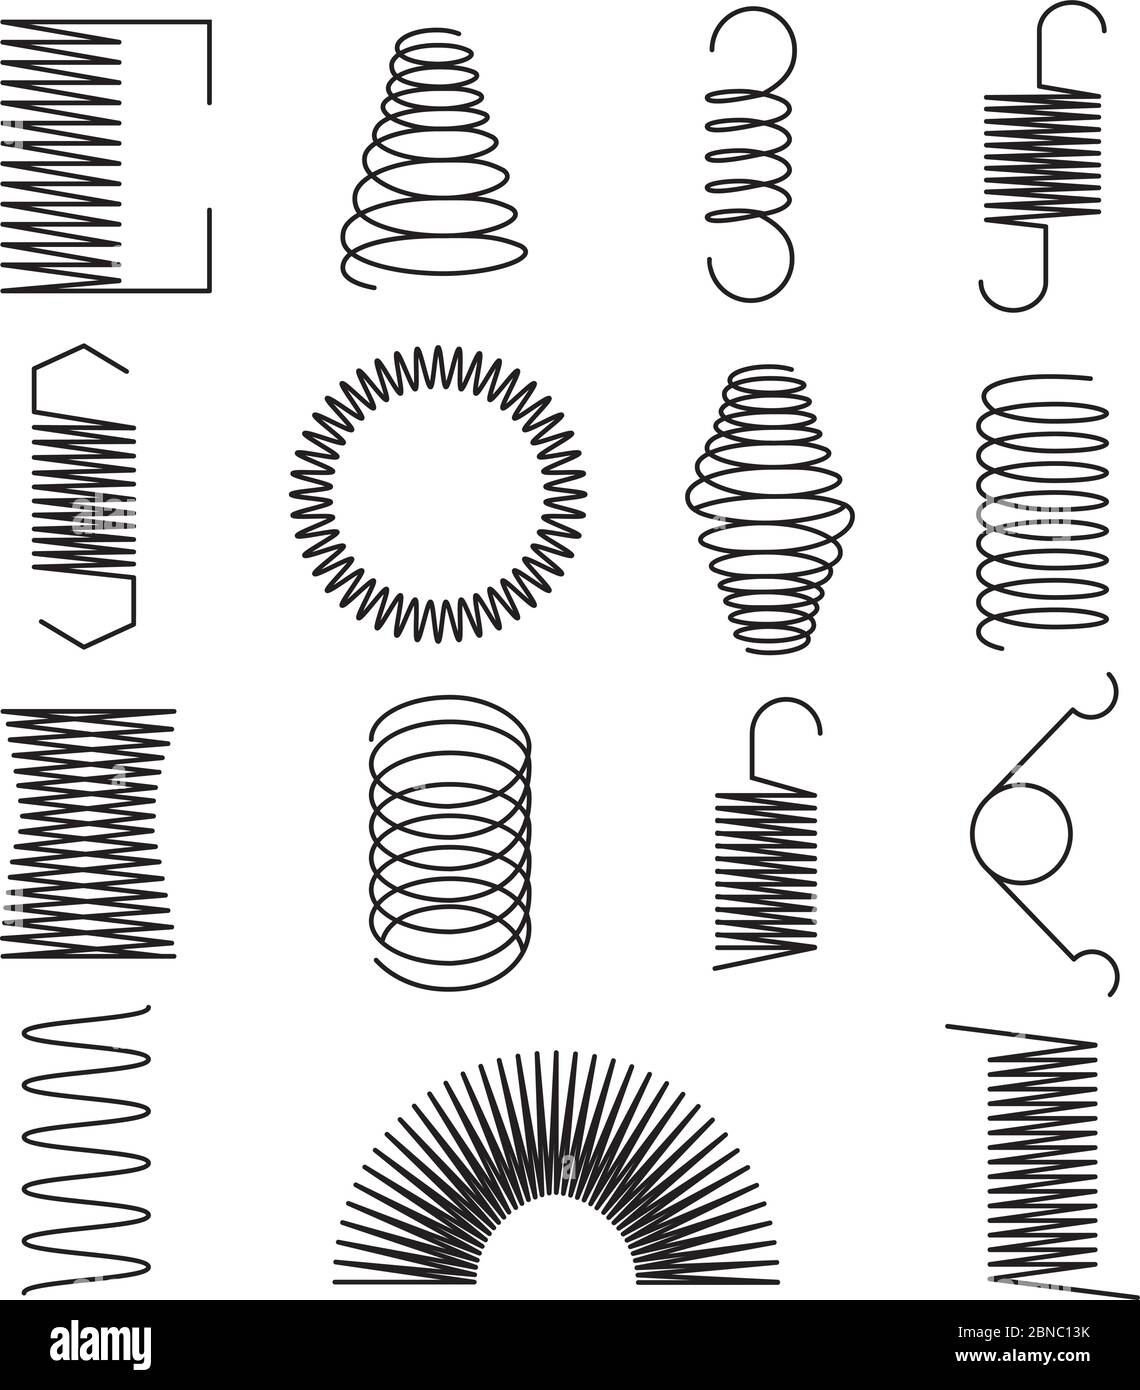 Metal spring icons. Flexible spiral lines, steel wire coils isolated vector symbols. Flexible coil and spring, spiral of part line illustration Stock Vector